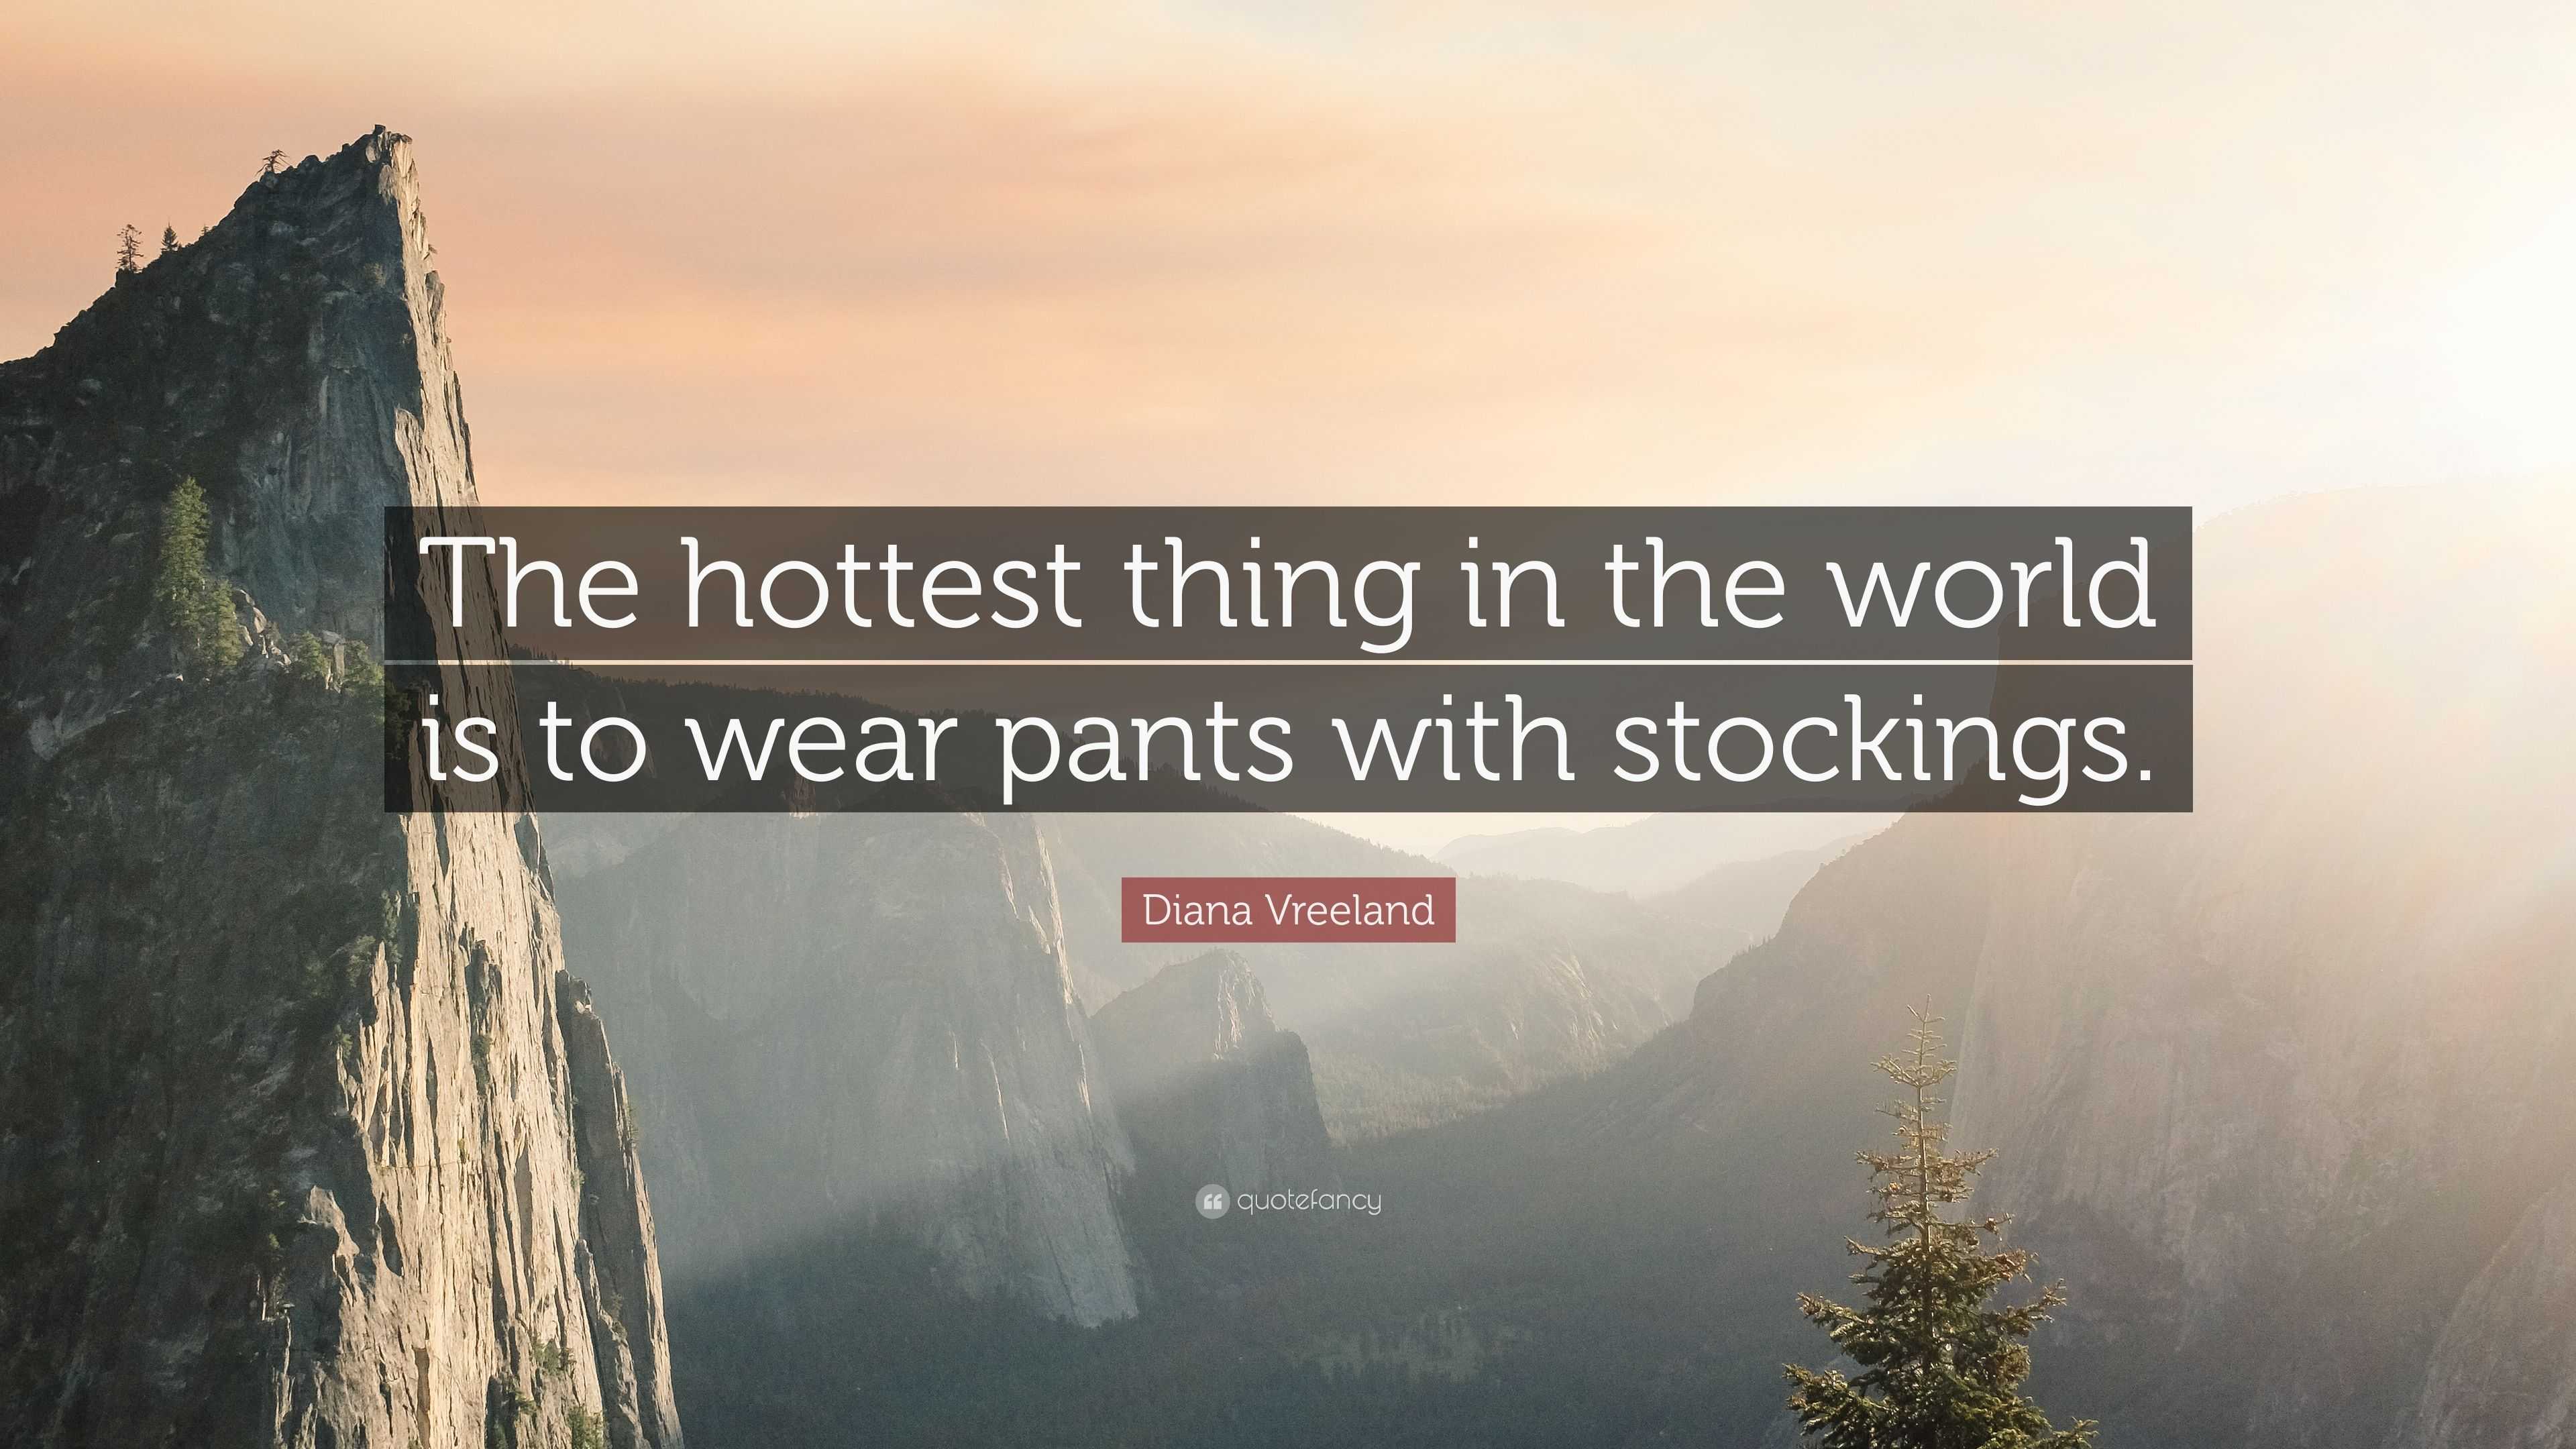 https://quotefancy.com/media/wallpaper/3840x2160/2640802-Diana-Vreeland-Quote-The-hottest-thing-in-the-world-is-to-wear.jpg